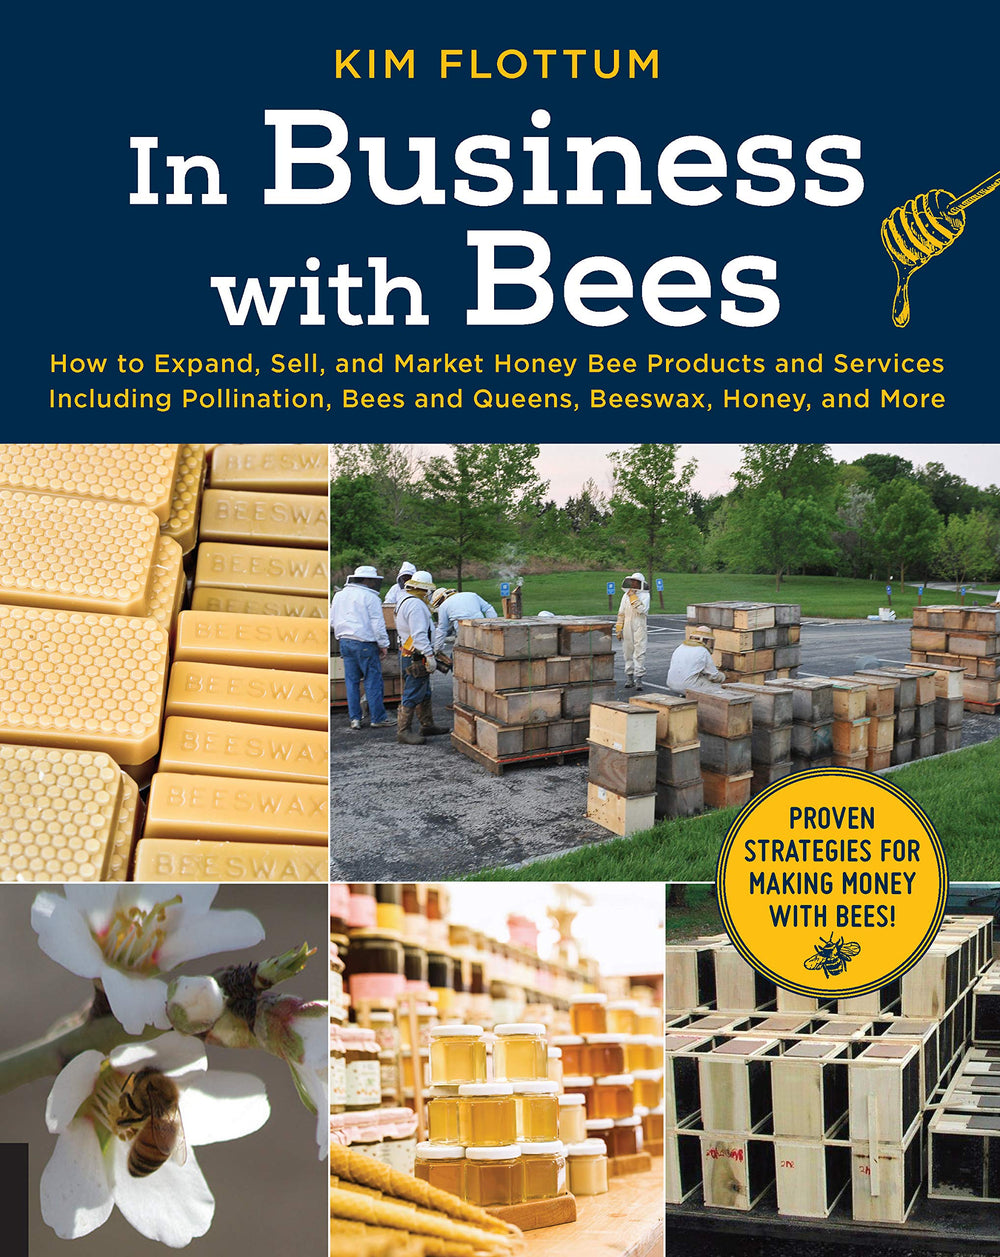 In Business with Bees by Kim Flottum